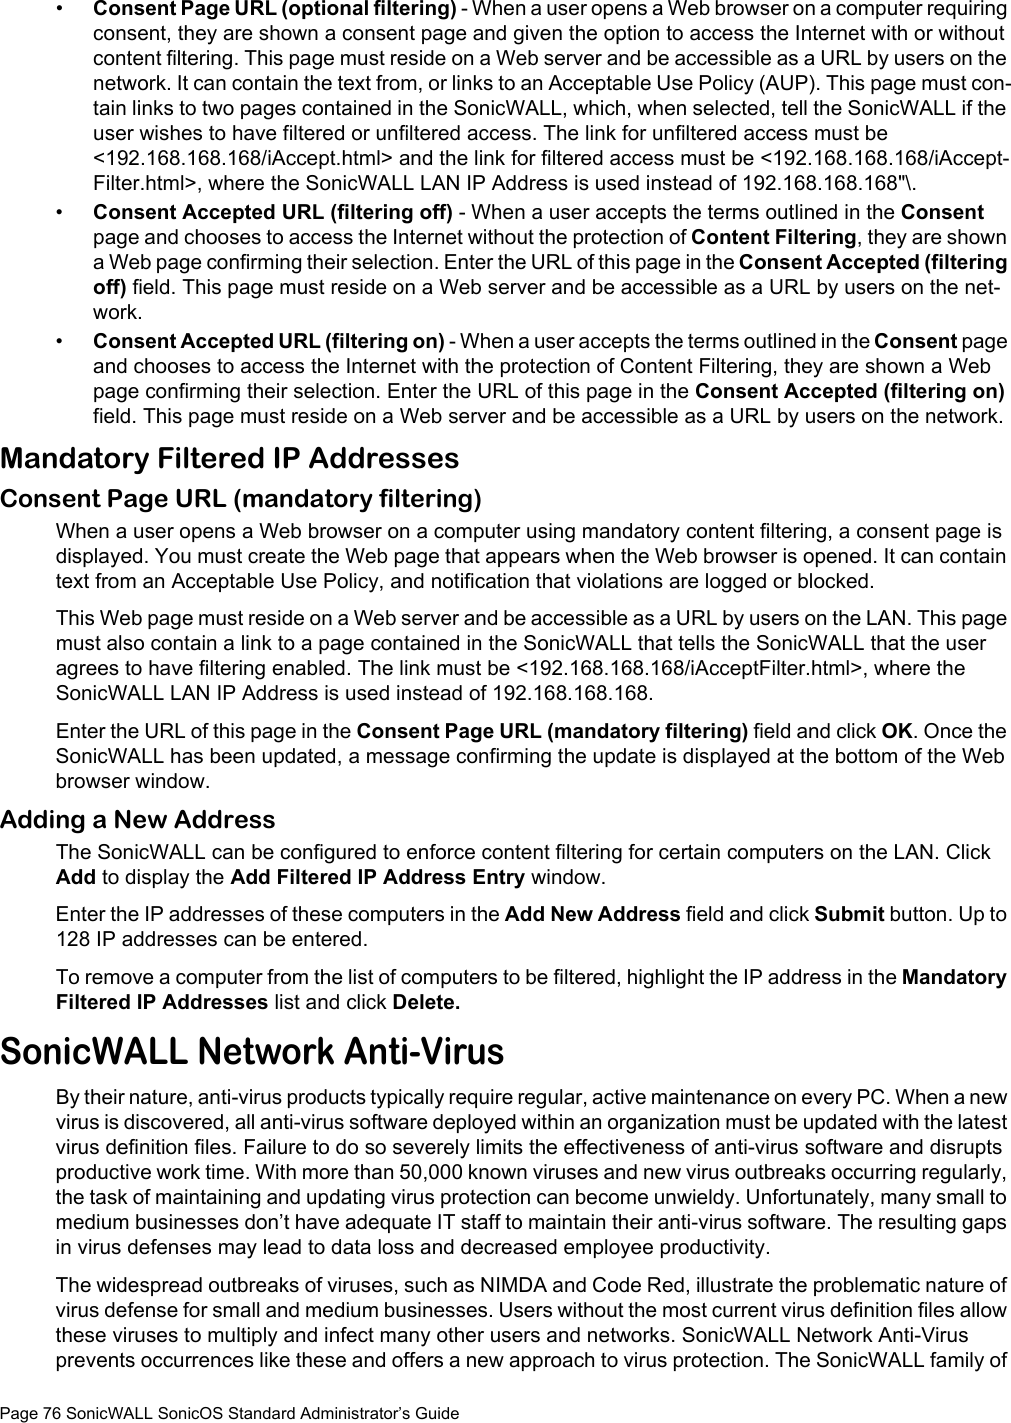 Page 76 SonicWALL SonicOS Standard Administrator’s Guide•Consent Page URL (optional filtering) - When a user opens a Web browser on a computer requiring consent, they are shown a consent page and given the option to access the Internet with or without content filtering. This page must reside on a Web server and be accessible as a URL by users on the network. It can contain the text from, or links to an Acceptable Use Policy (AUP). This page must con-tain links to two pages contained in the SonicWALL, which, when selected, tell the SonicWALL if the user wishes to have filtered or unfiltered access. The link for unfiltered access must be &lt;192.168.168.168/iAccept.html&gt; and the link for filtered access must be &lt;192.168.168.168/iAccept-Filter.html&gt;, where the SonicWALL LAN IP Address is used instead of 192.168.168.168&quot;\.•Consent Accepted URL (filtering off) - When a user accepts the terms outlined in the Consent page and chooses to access the Internet without the protection of Content Filtering, they are shown a Web page confirming their selection. Enter the URL of this page in the Consent Accepted (filtering off) field. This page must reside on a Web server and be accessible as a URL by users on the net-work. •Consent Accepted URL (filtering on) - When a user accepts the terms outlined in the Consent page and chooses to access the Internet with the protection of Content Filtering, they are shown a Web page confirming their selection. Enter the URL of this page in the Consent Accepted (filtering on) field. This page must reside on a Web server and be accessible as a URL by users on the network.Mandatory Filtered IP AddressesConsent Page URL (mandatory filtering) When a user opens a Web browser on a computer using mandatory content filtering, a consent page is displayed. You must create the Web page that appears when the Web browser is opened. It can contain text from an Acceptable Use Policy, and notification that violations are logged or blocked. This Web page must reside on a Web server and be accessible as a URL by users on the LAN. This page must also contain a link to a page contained in the SonicWALL that tells the SonicWALL that the user agrees to have filtering enabled. The link must be &lt;192.168.168.168/iAcceptFilter.html&gt;, where the SonicWALL LAN IP Address is used instead of 192.168.168.168.Enter the URL of this page in the Consent Page URL (mandatory filtering) field and click OK. Once the SonicWALL has been updated, a message confirming the update is displayed at the bottom of the Web browser window. Adding a New Address The SonicWALL can be configured to enforce content filtering for certain computers on the LAN. Click Add to display the Add Filtered IP Address Entry window. Enter the IP addresses of these computers in the Add New Address field and click Submit button. Up to 128 IP addresses can be entered. To remove a computer from the list of computers to be filtered, highlight the IP address in the Mandatory Filtered IP Addresses list and click Delete.SonicWALL Network Anti-VirusBy their nature, anti-virus products typically require regular, active maintenance on every PC. When a new virus is discovered, all anti-virus software deployed within an organization must be updated with the latest virus definition files. Failure to do so severely limits the effectiveness of anti-virus software and disrupts productive work time. With more than 50,000 known viruses and new virus outbreaks occurring regularly, the task of maintaining and updating virus protection can become unwieldy. Unfortunately, many small to medium businesses don’t have adequate IT staff to maintain their anti-virus software. The resulting gaps in virus defenses may lead to data loss and decreased employee productivity.The widespread outbreaks of viruses, such as NIMDA and Code Red, illustrate the problematic nature of virus defense for small and medium businesses. Users without the most current virus definition files allow these viruses to multiply and infect many other users and networks. SonicWALL Network Anti-Virus prevents occurrences like these and offers a new approach to virus protection. The SonicWALL family of 